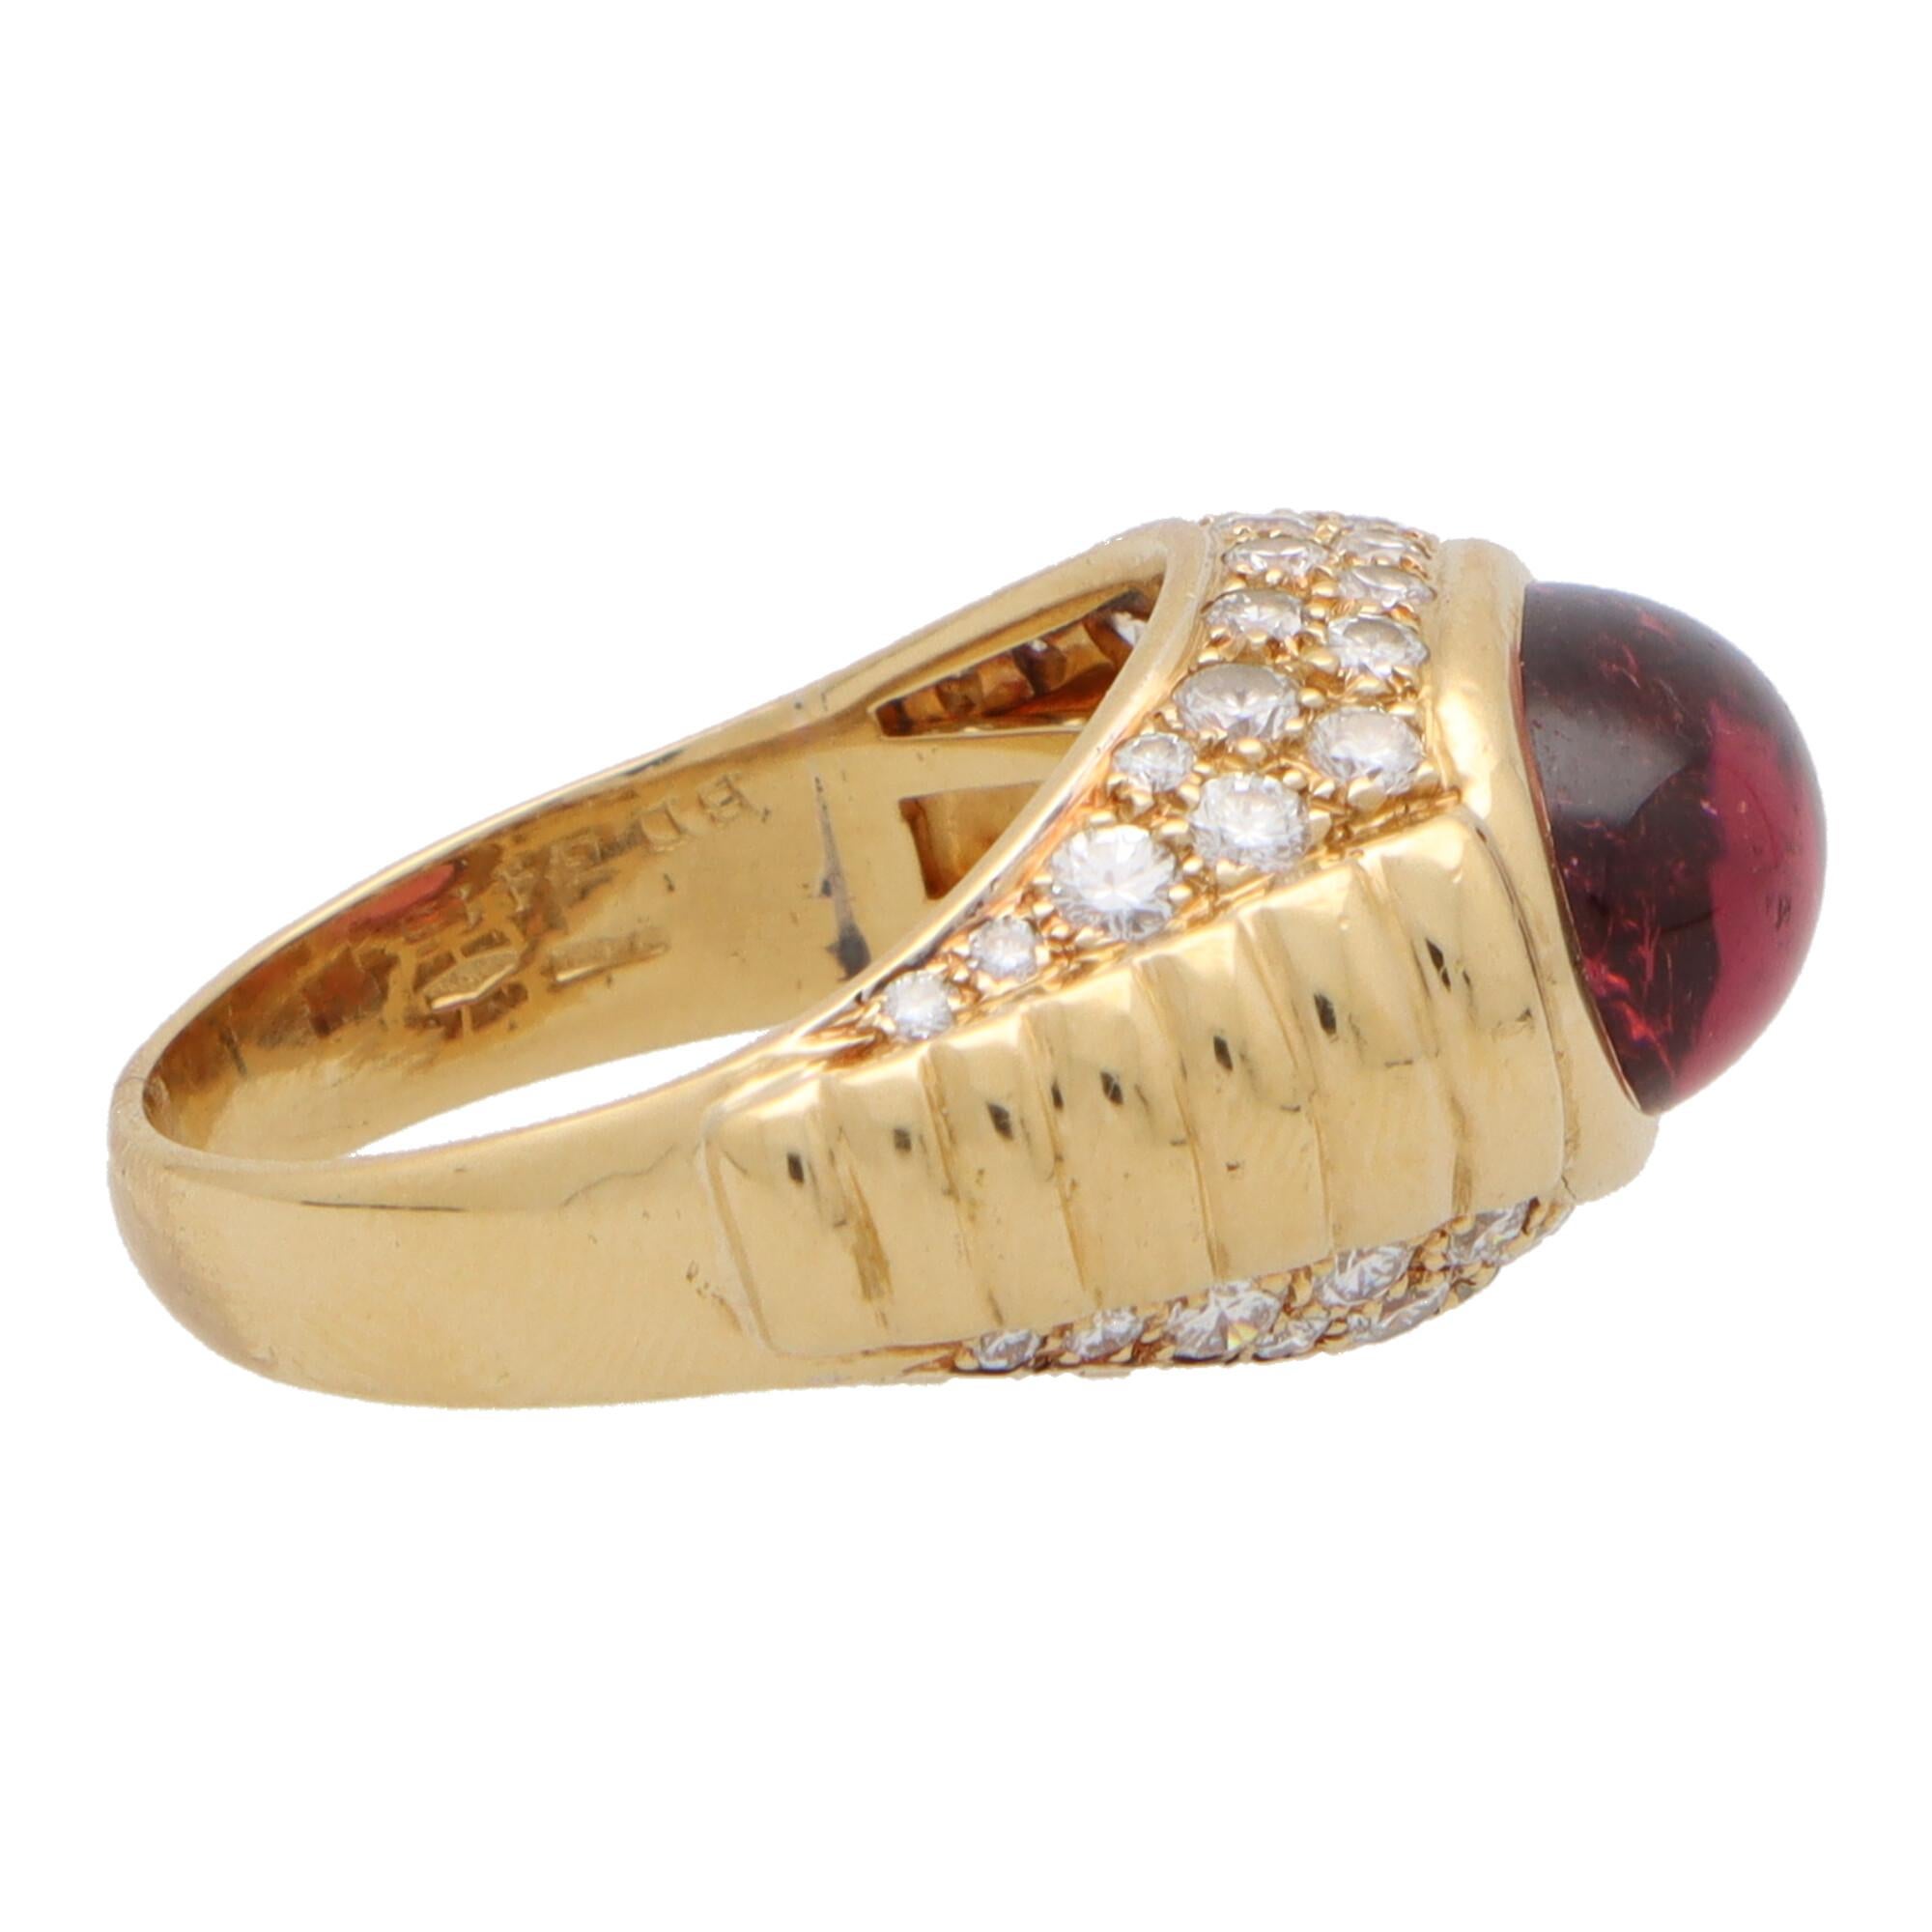 Vintage Bvlgari Tourmaline and Diamond Bypass Ring Set in 18k Yellow Gold For Sale 1